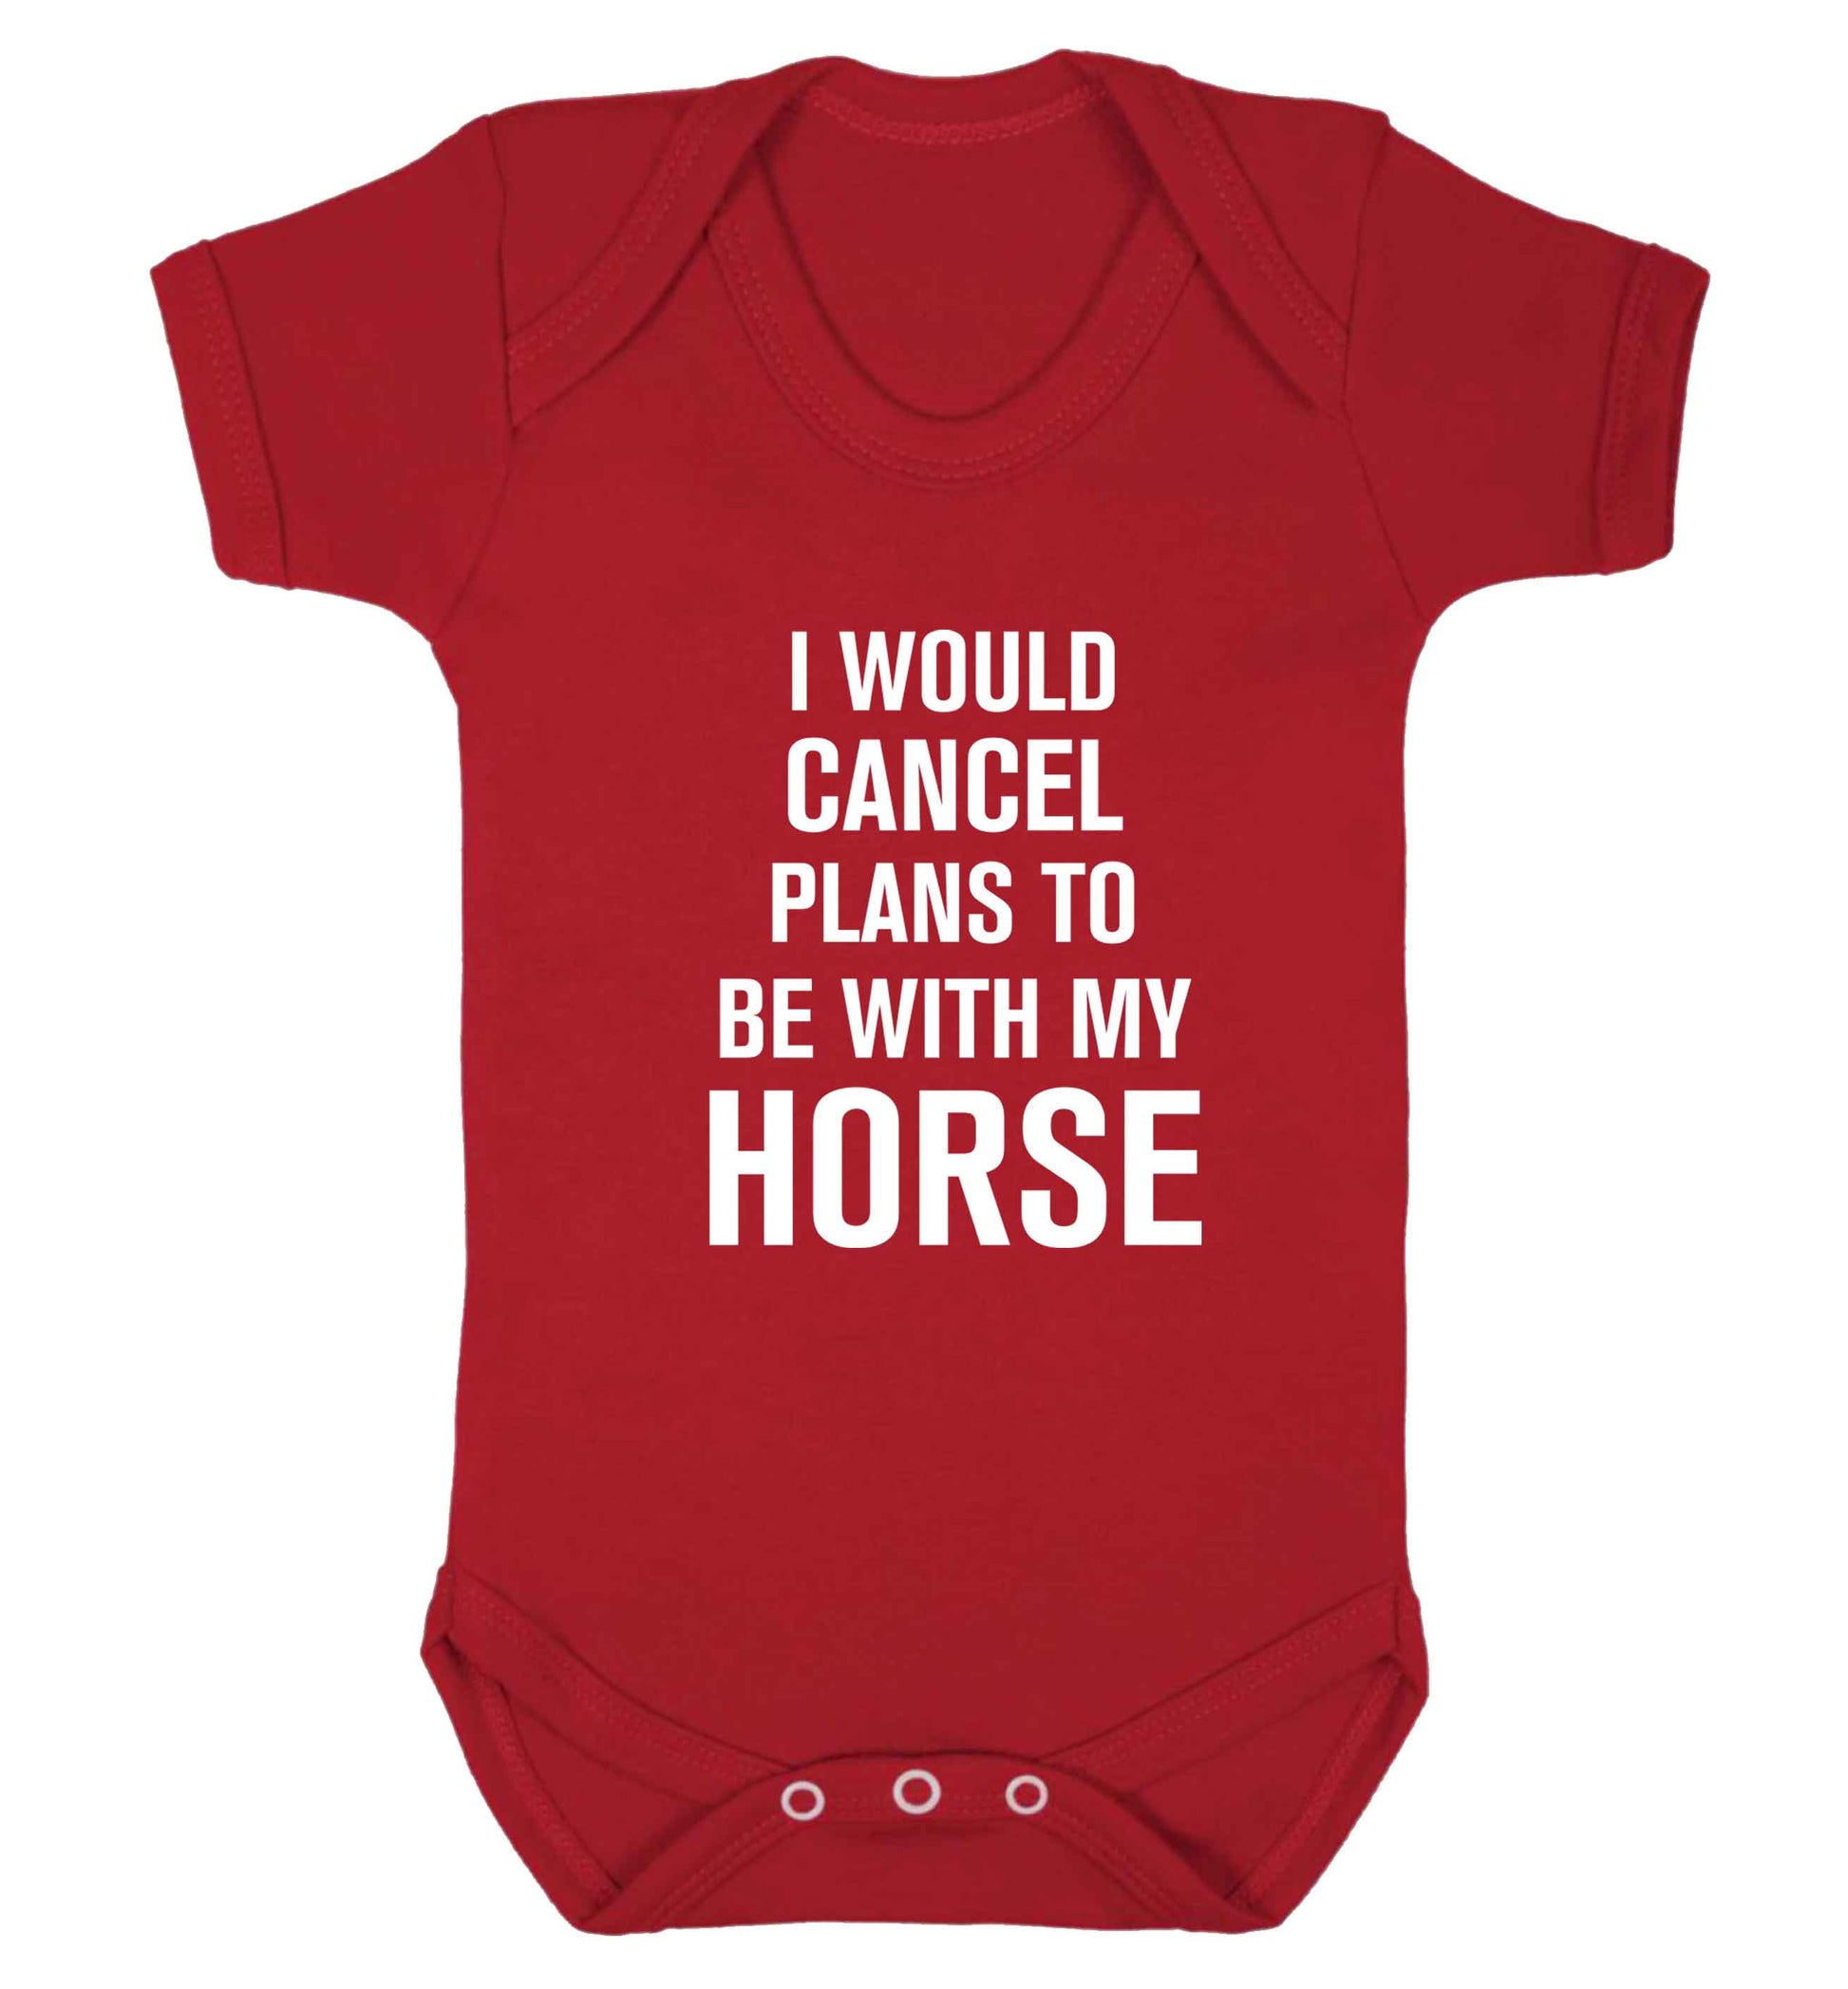 I will cancel plans to be with my horse baby vest red 18-24 months